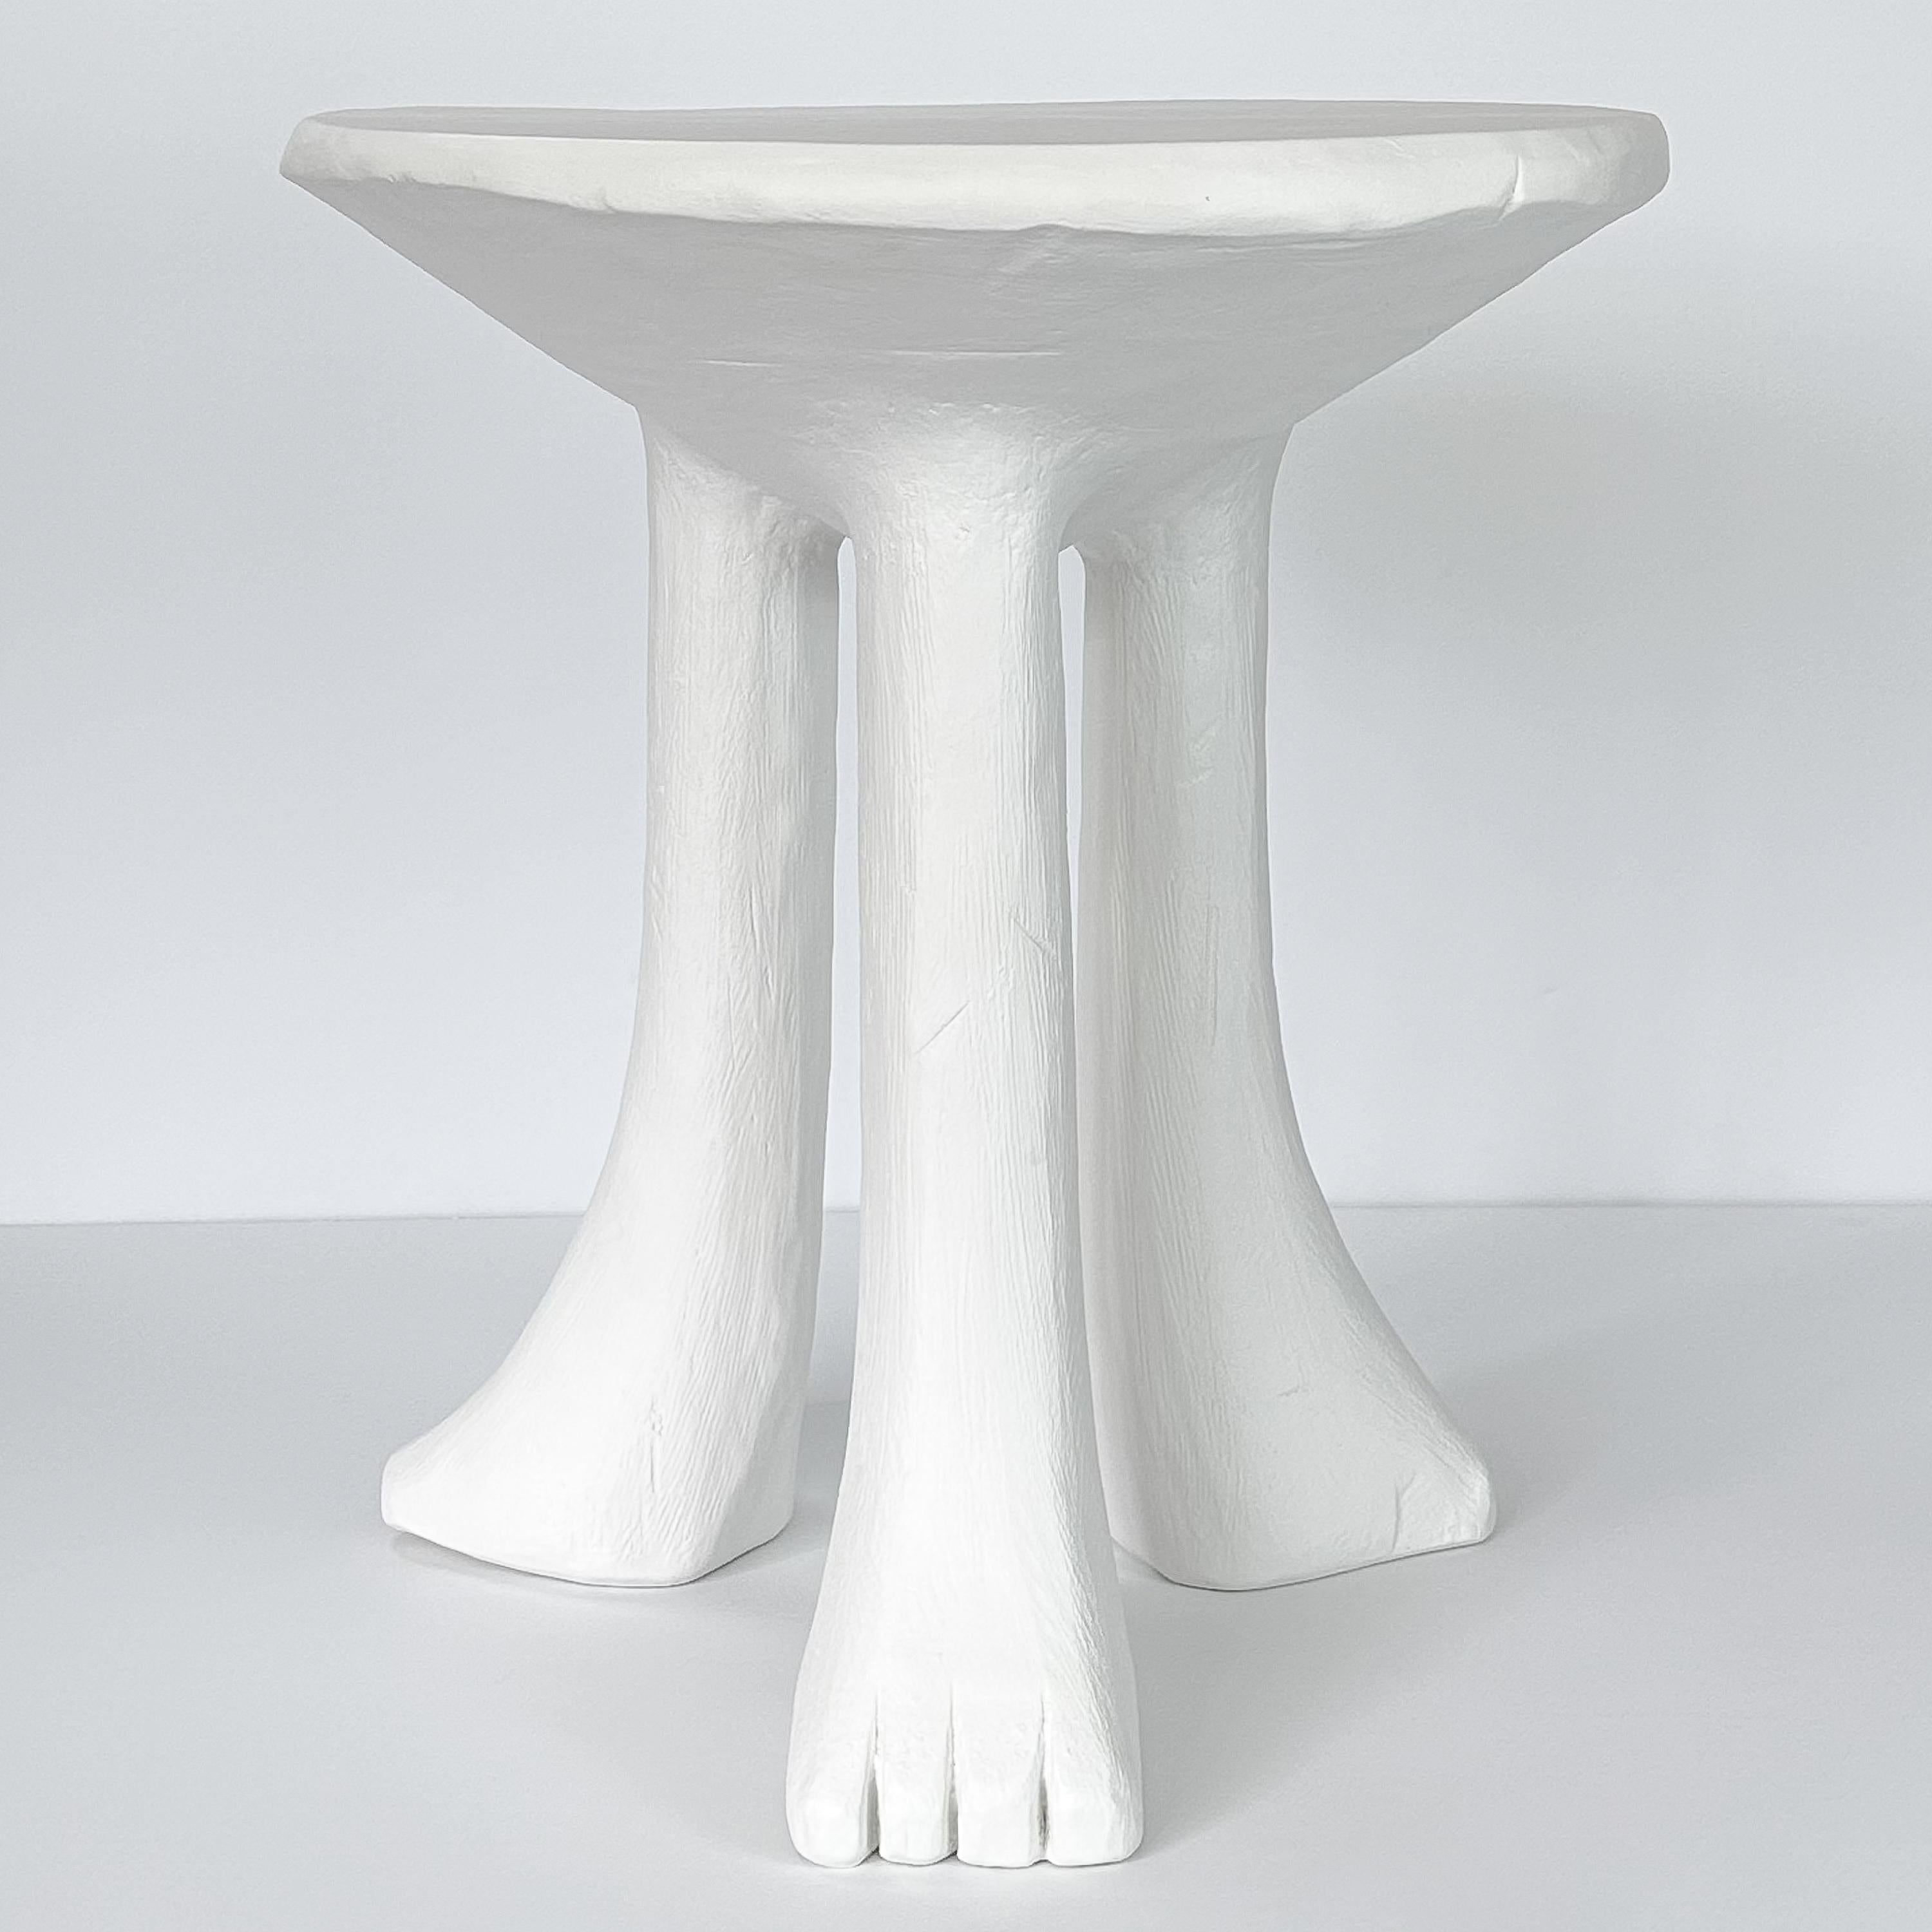 Discover an exquisite masterpiece of art and design with this rare and iconic African end table by the legendary John Dickinson (American 1920 - 1982).  Model 101-A.  Hand-crafted circa 1980 during the zenith of Dickinson's celebrated career, this